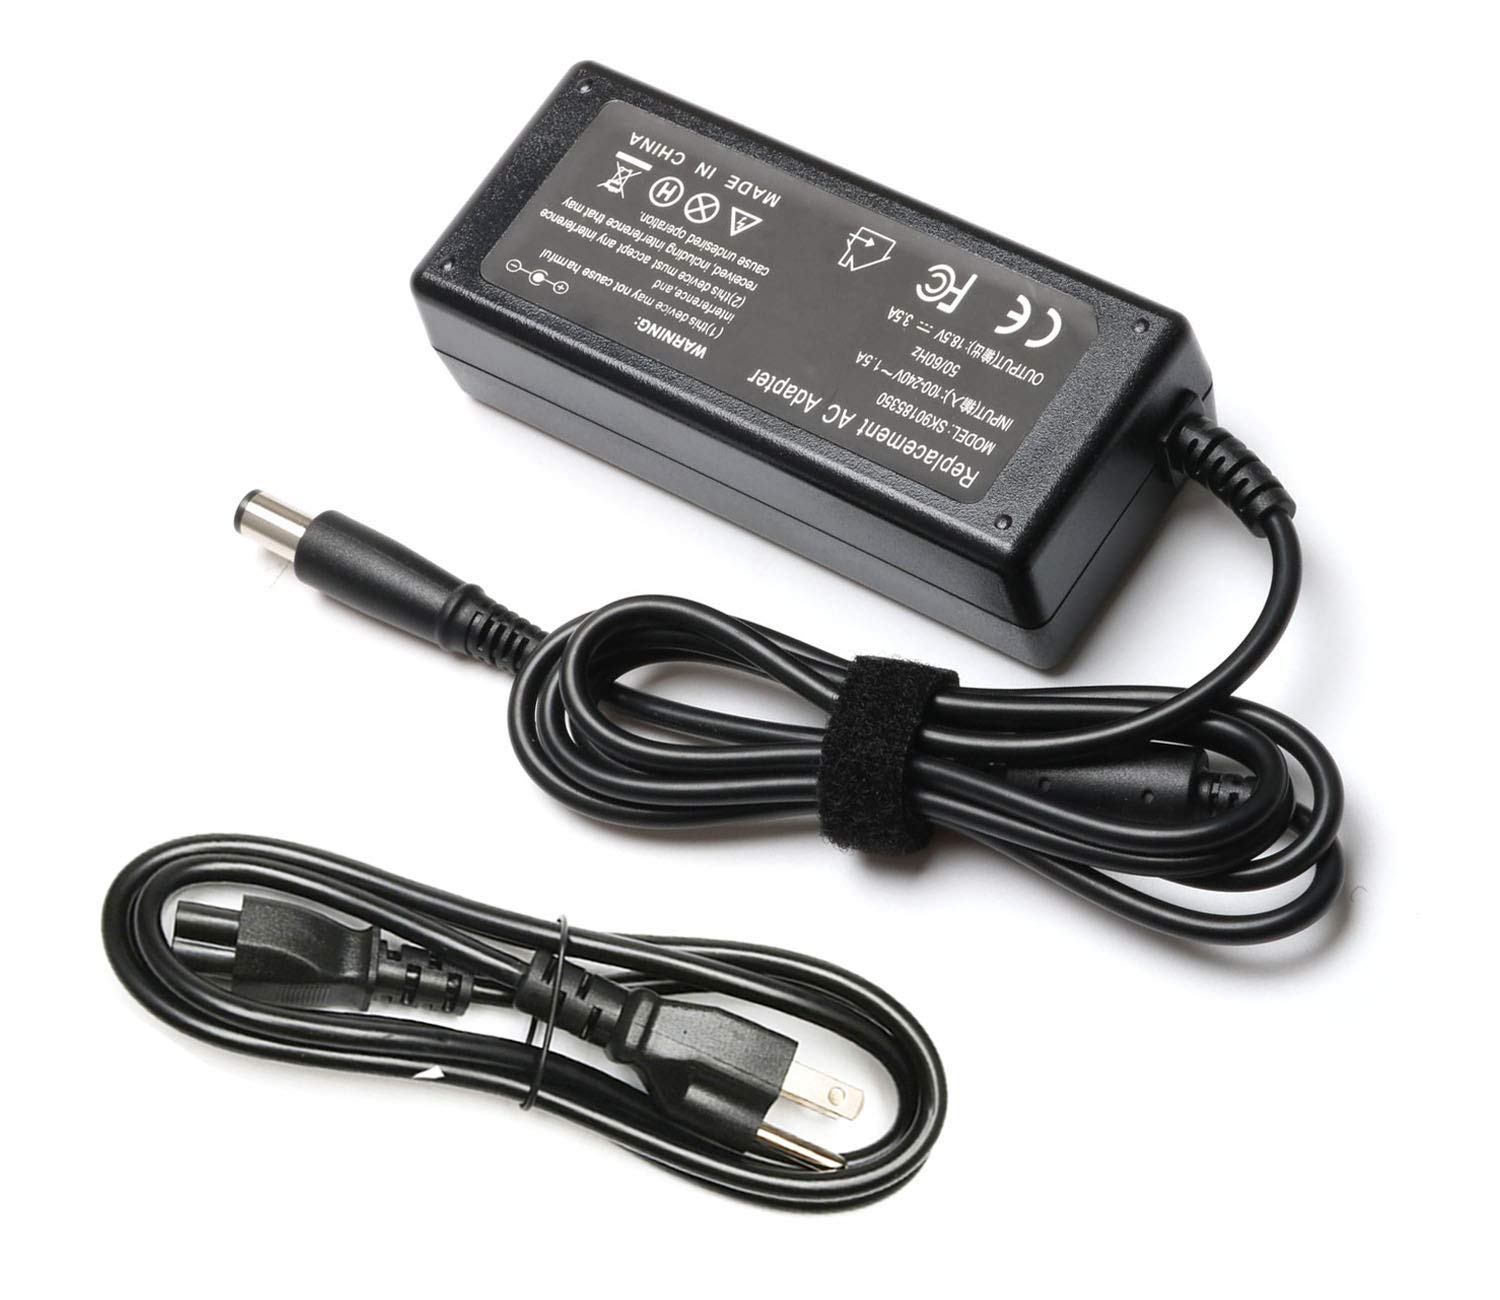 Mua 65W Laptop Charger AC/DC Adapter for HP Pavilion G4 G6 G7 M6 DM4 DV4 DV5  DV6 G60 G61 G72; EliteBook 2540p 2560p 2570p 2730p 2740p Power Supply Cord  trên Amazon Mỹ